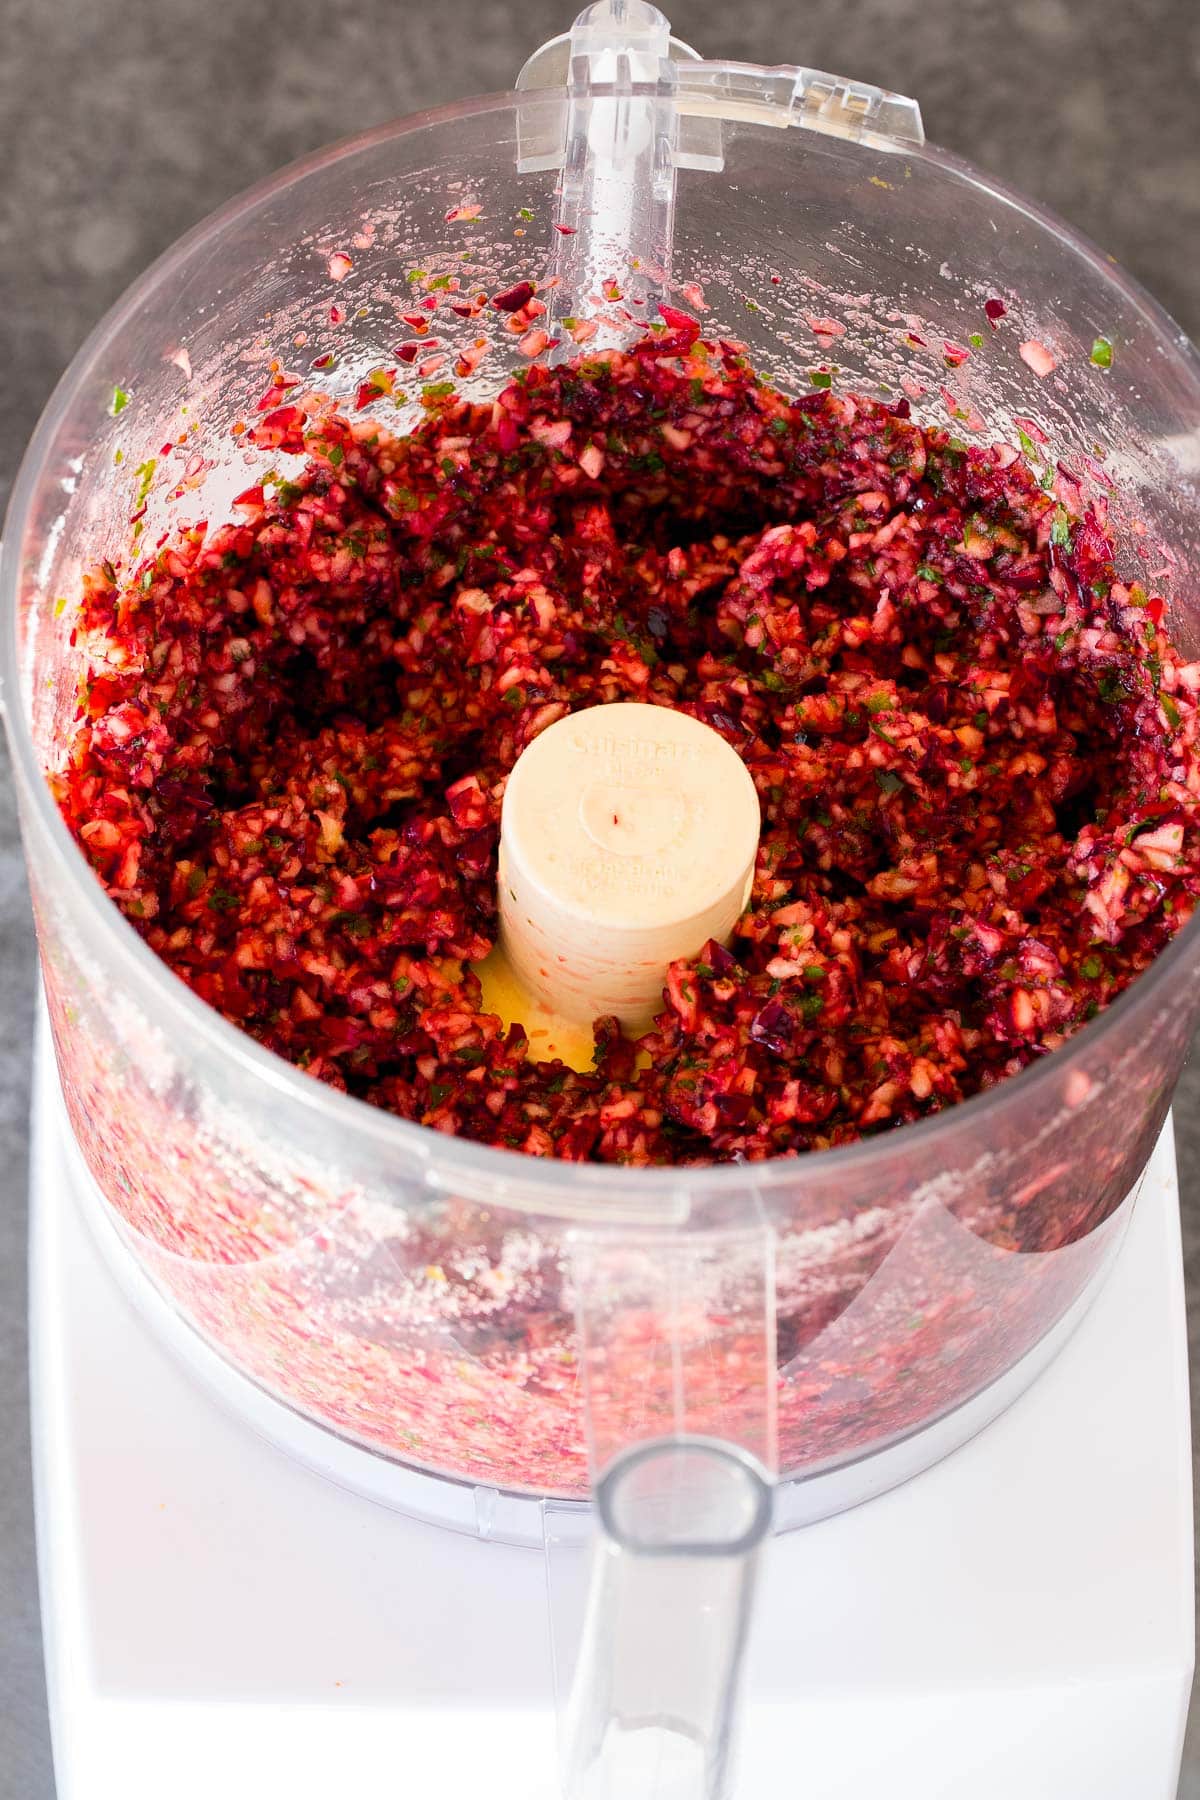 Cranberries, herbs and sugar ground together in a food processor.